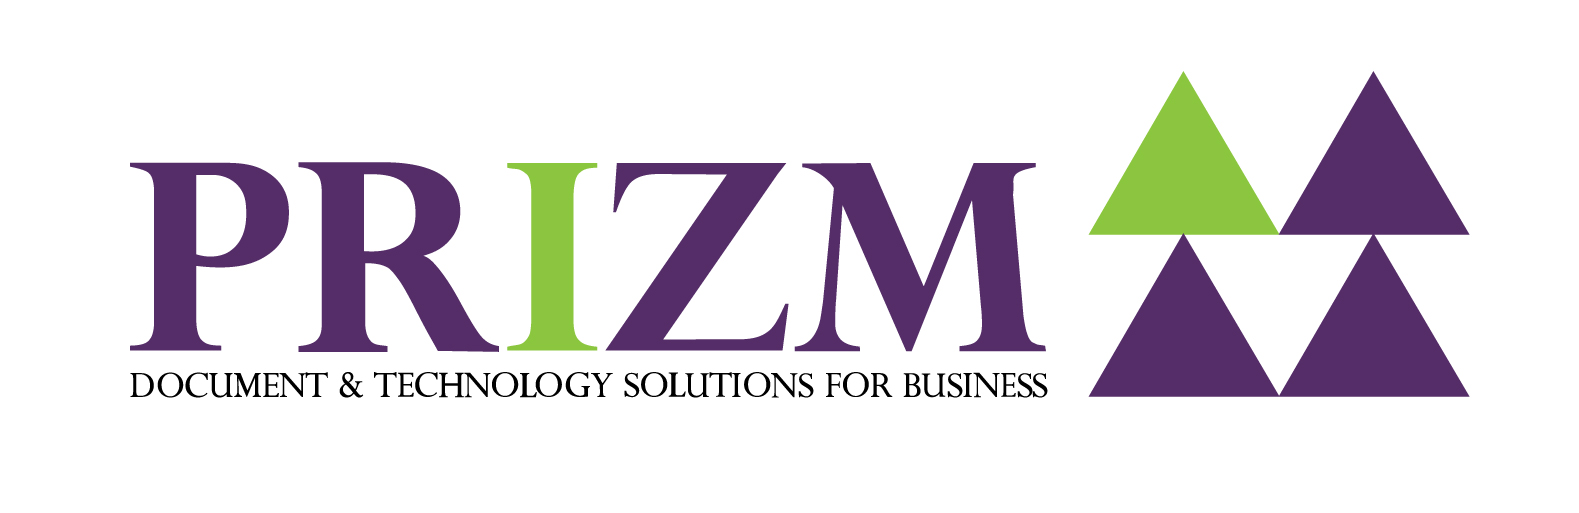 Prizm Document and Technology Solutions